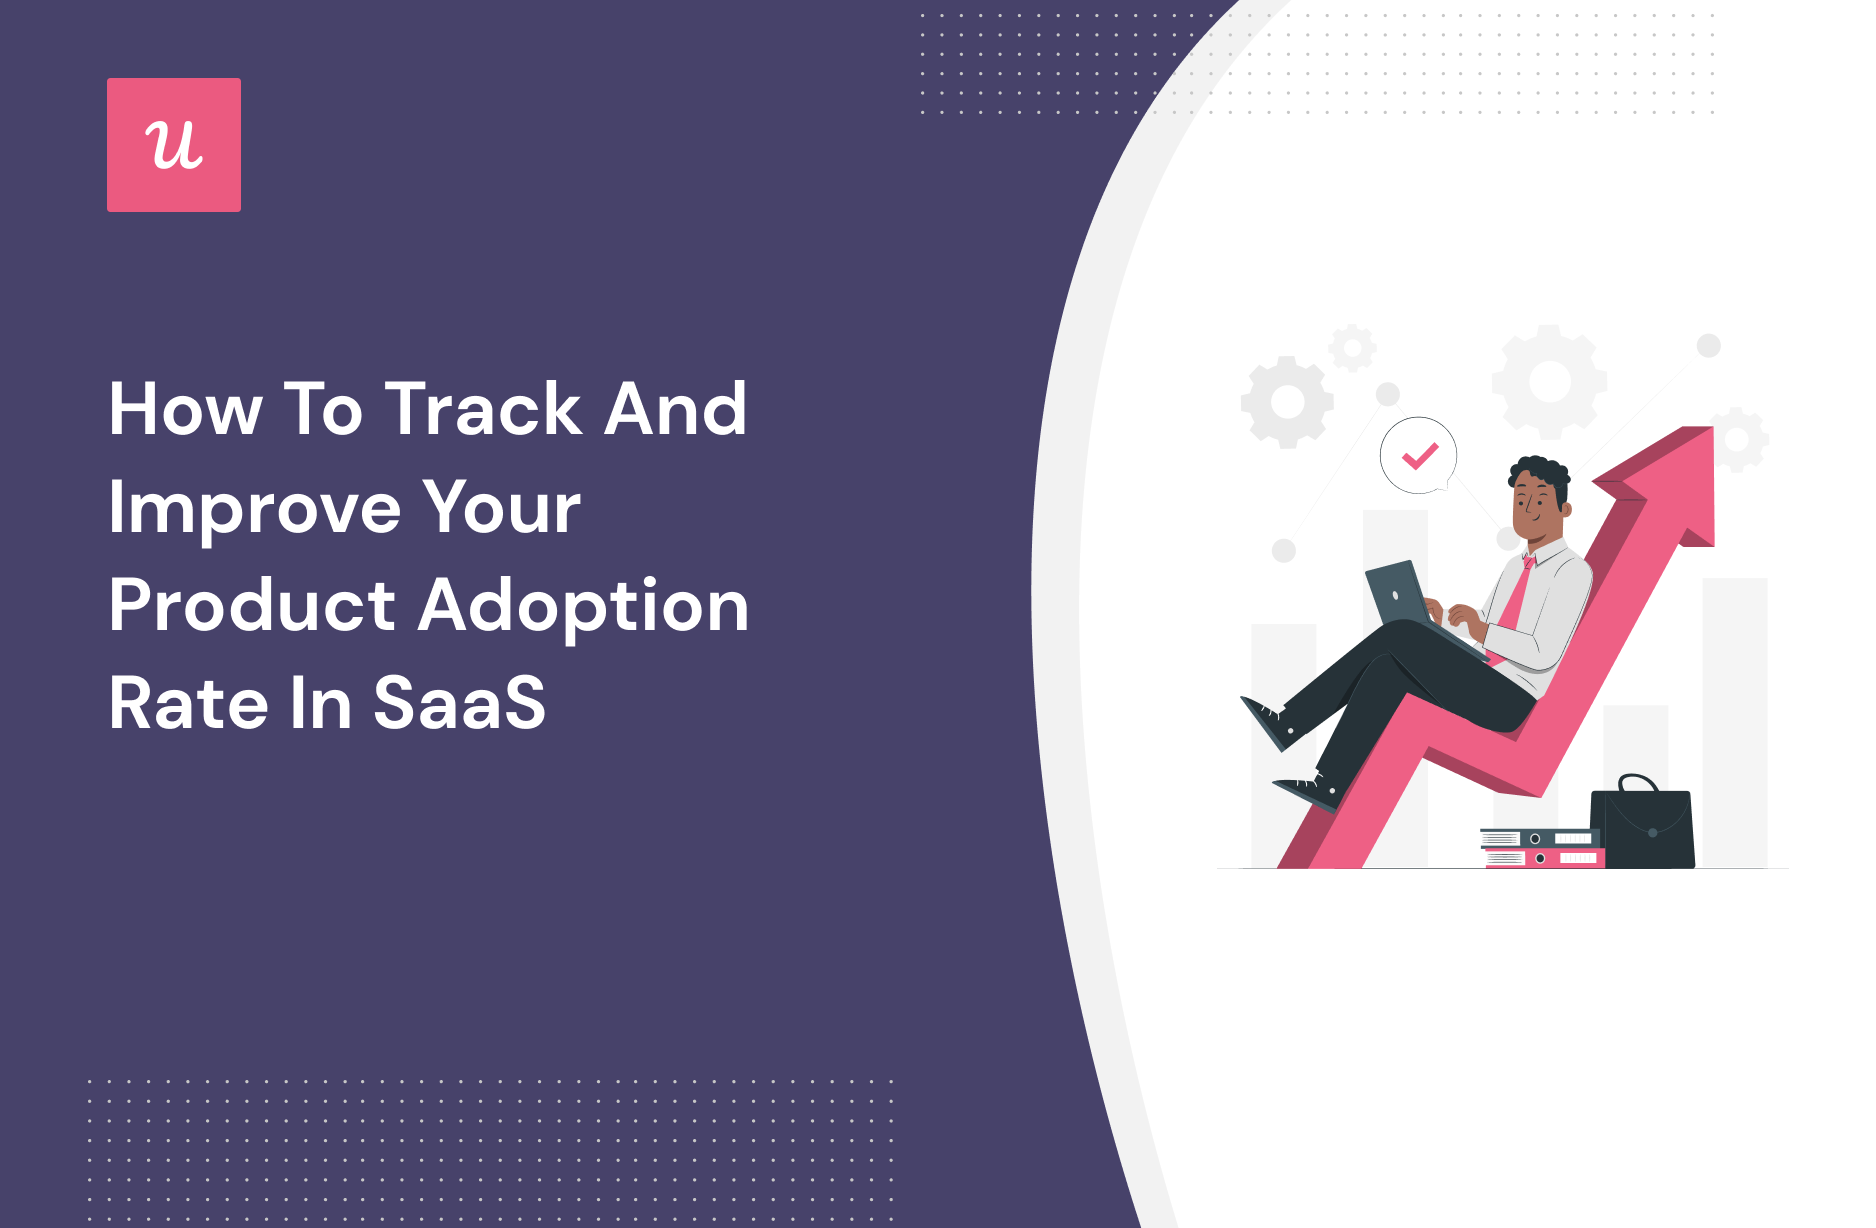 How to Track and Improve Your Product Adoption Rate in SaaS